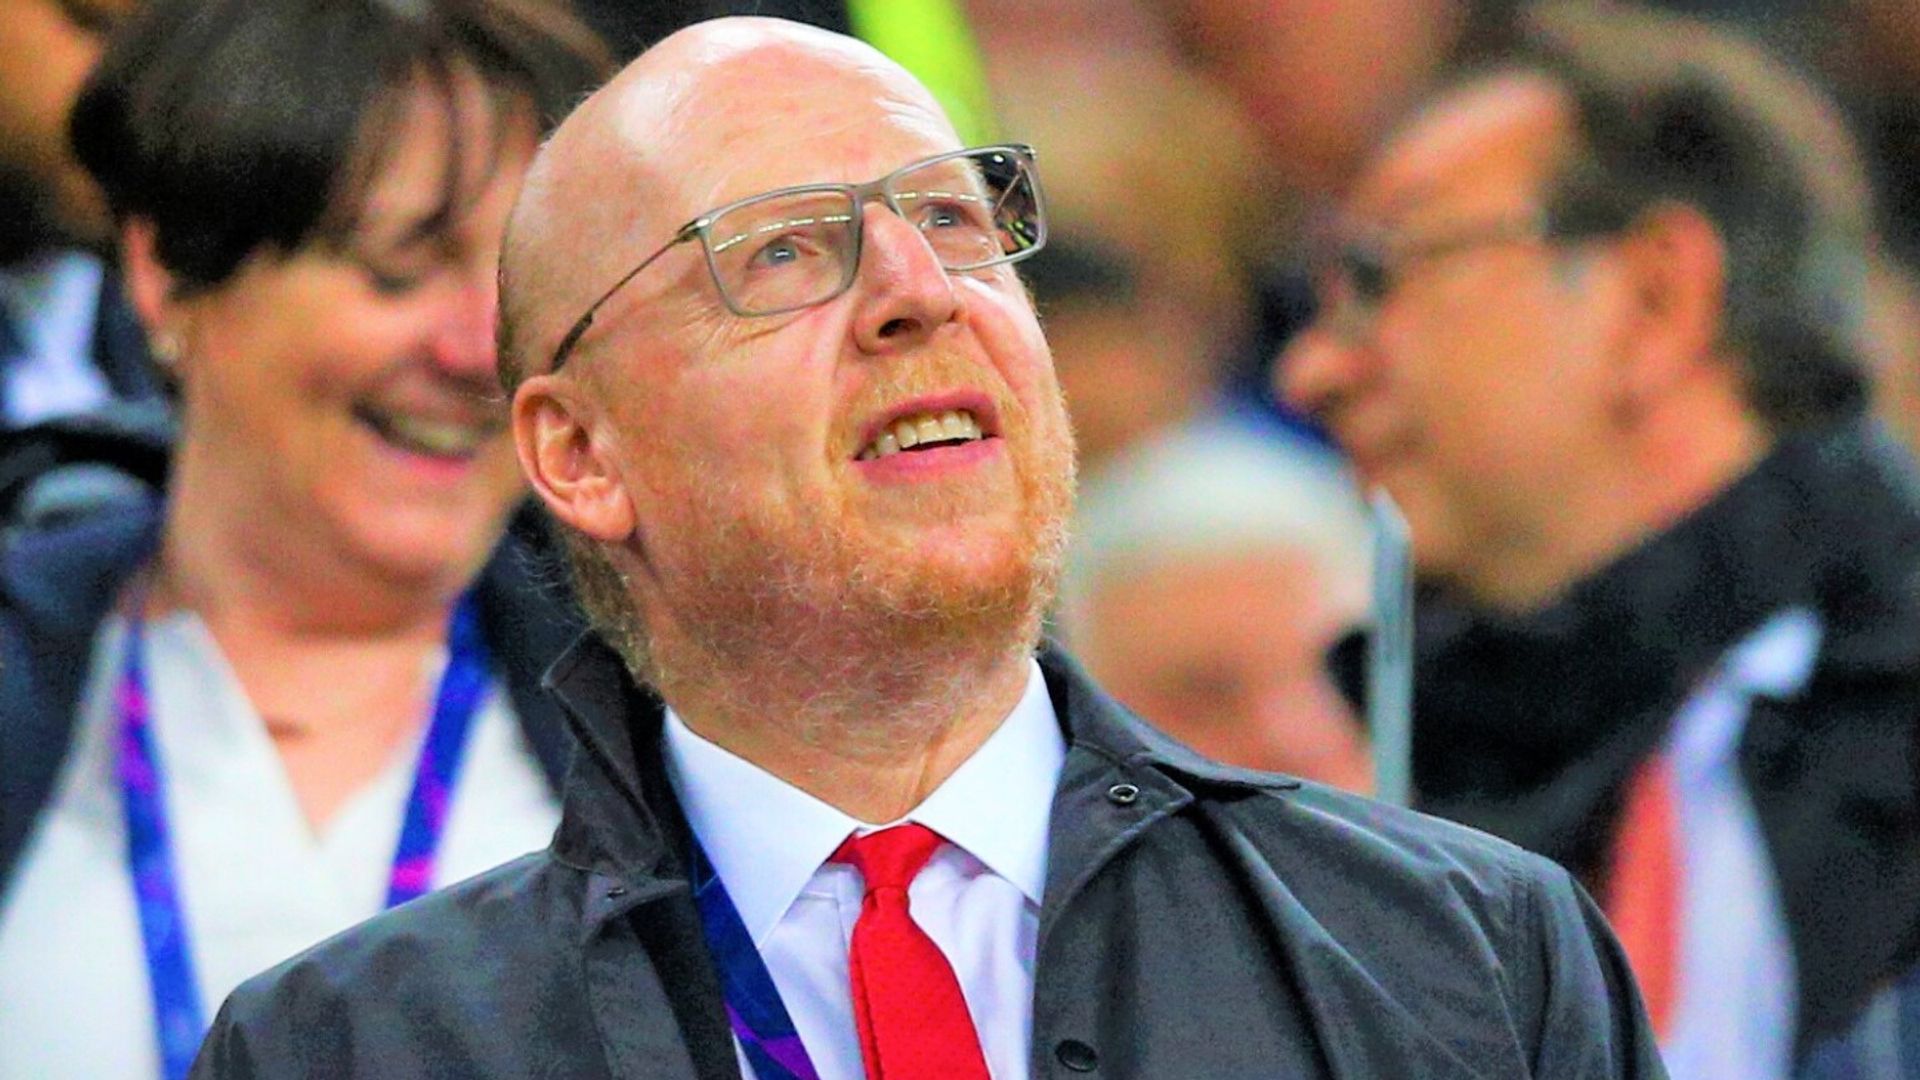 News: Glazers 'not ready to sell Utd' says Ratcliffe